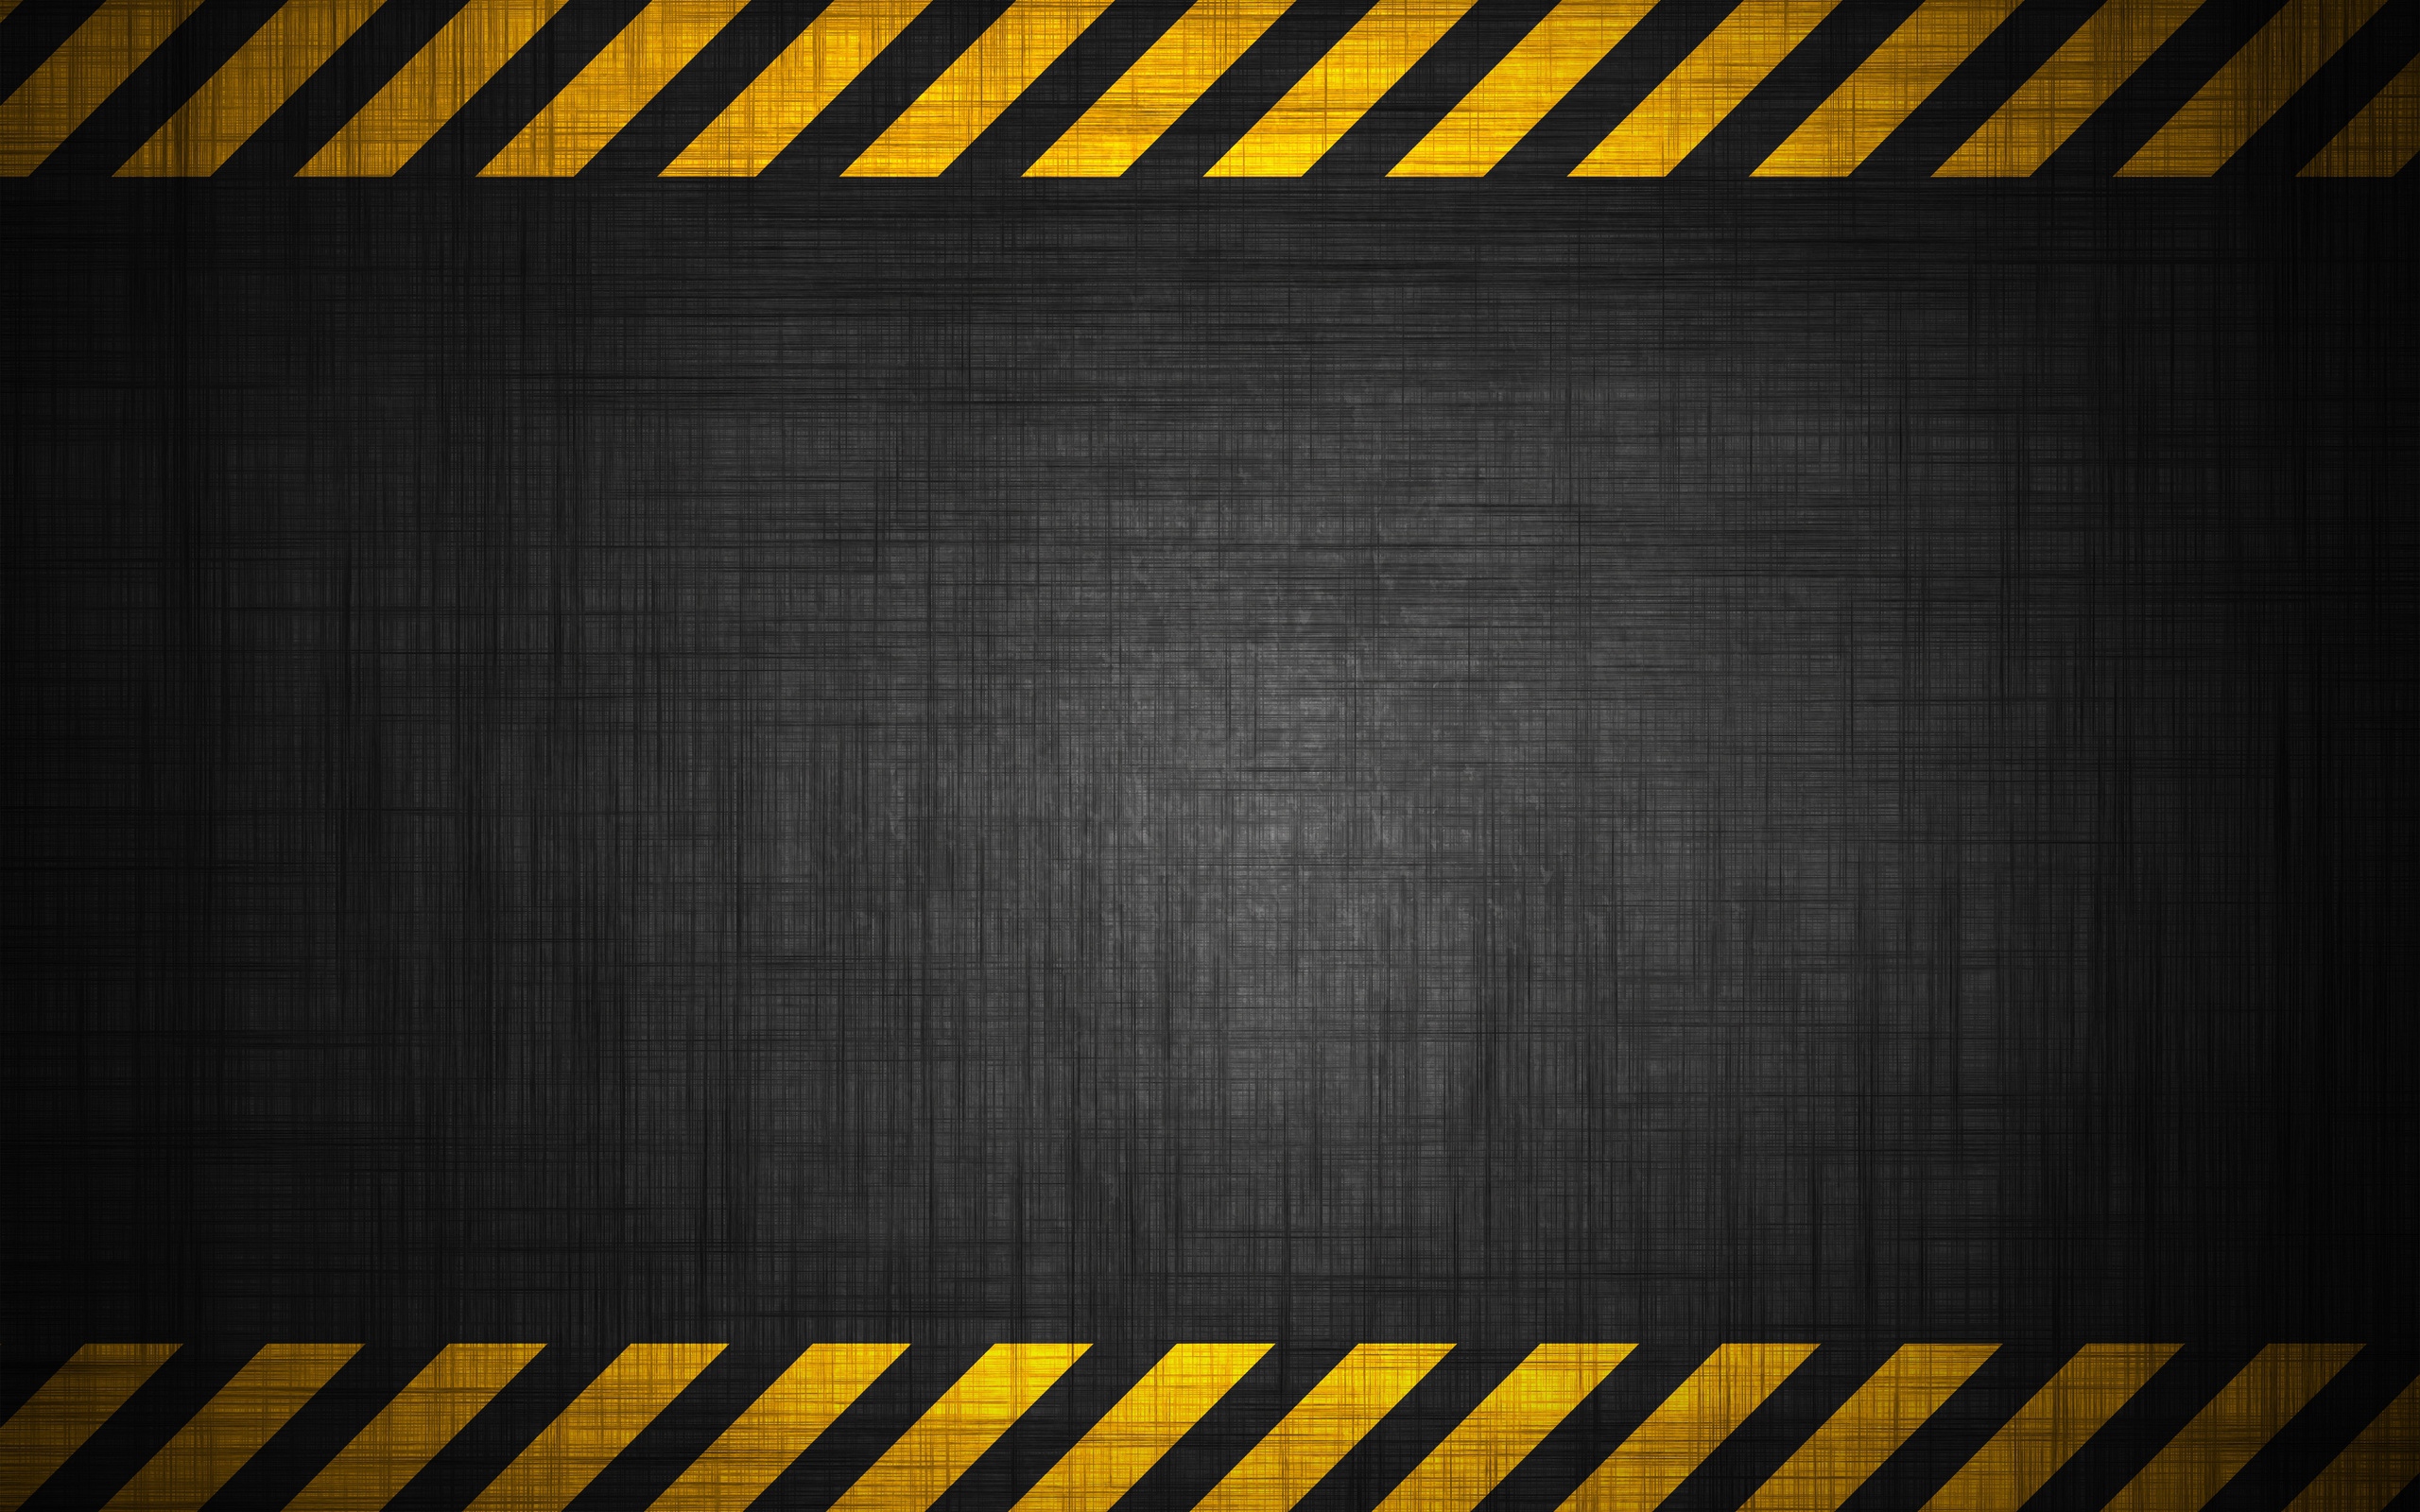 Wallpaper Black and Yellow Striped Textile, Background - Download Free Image